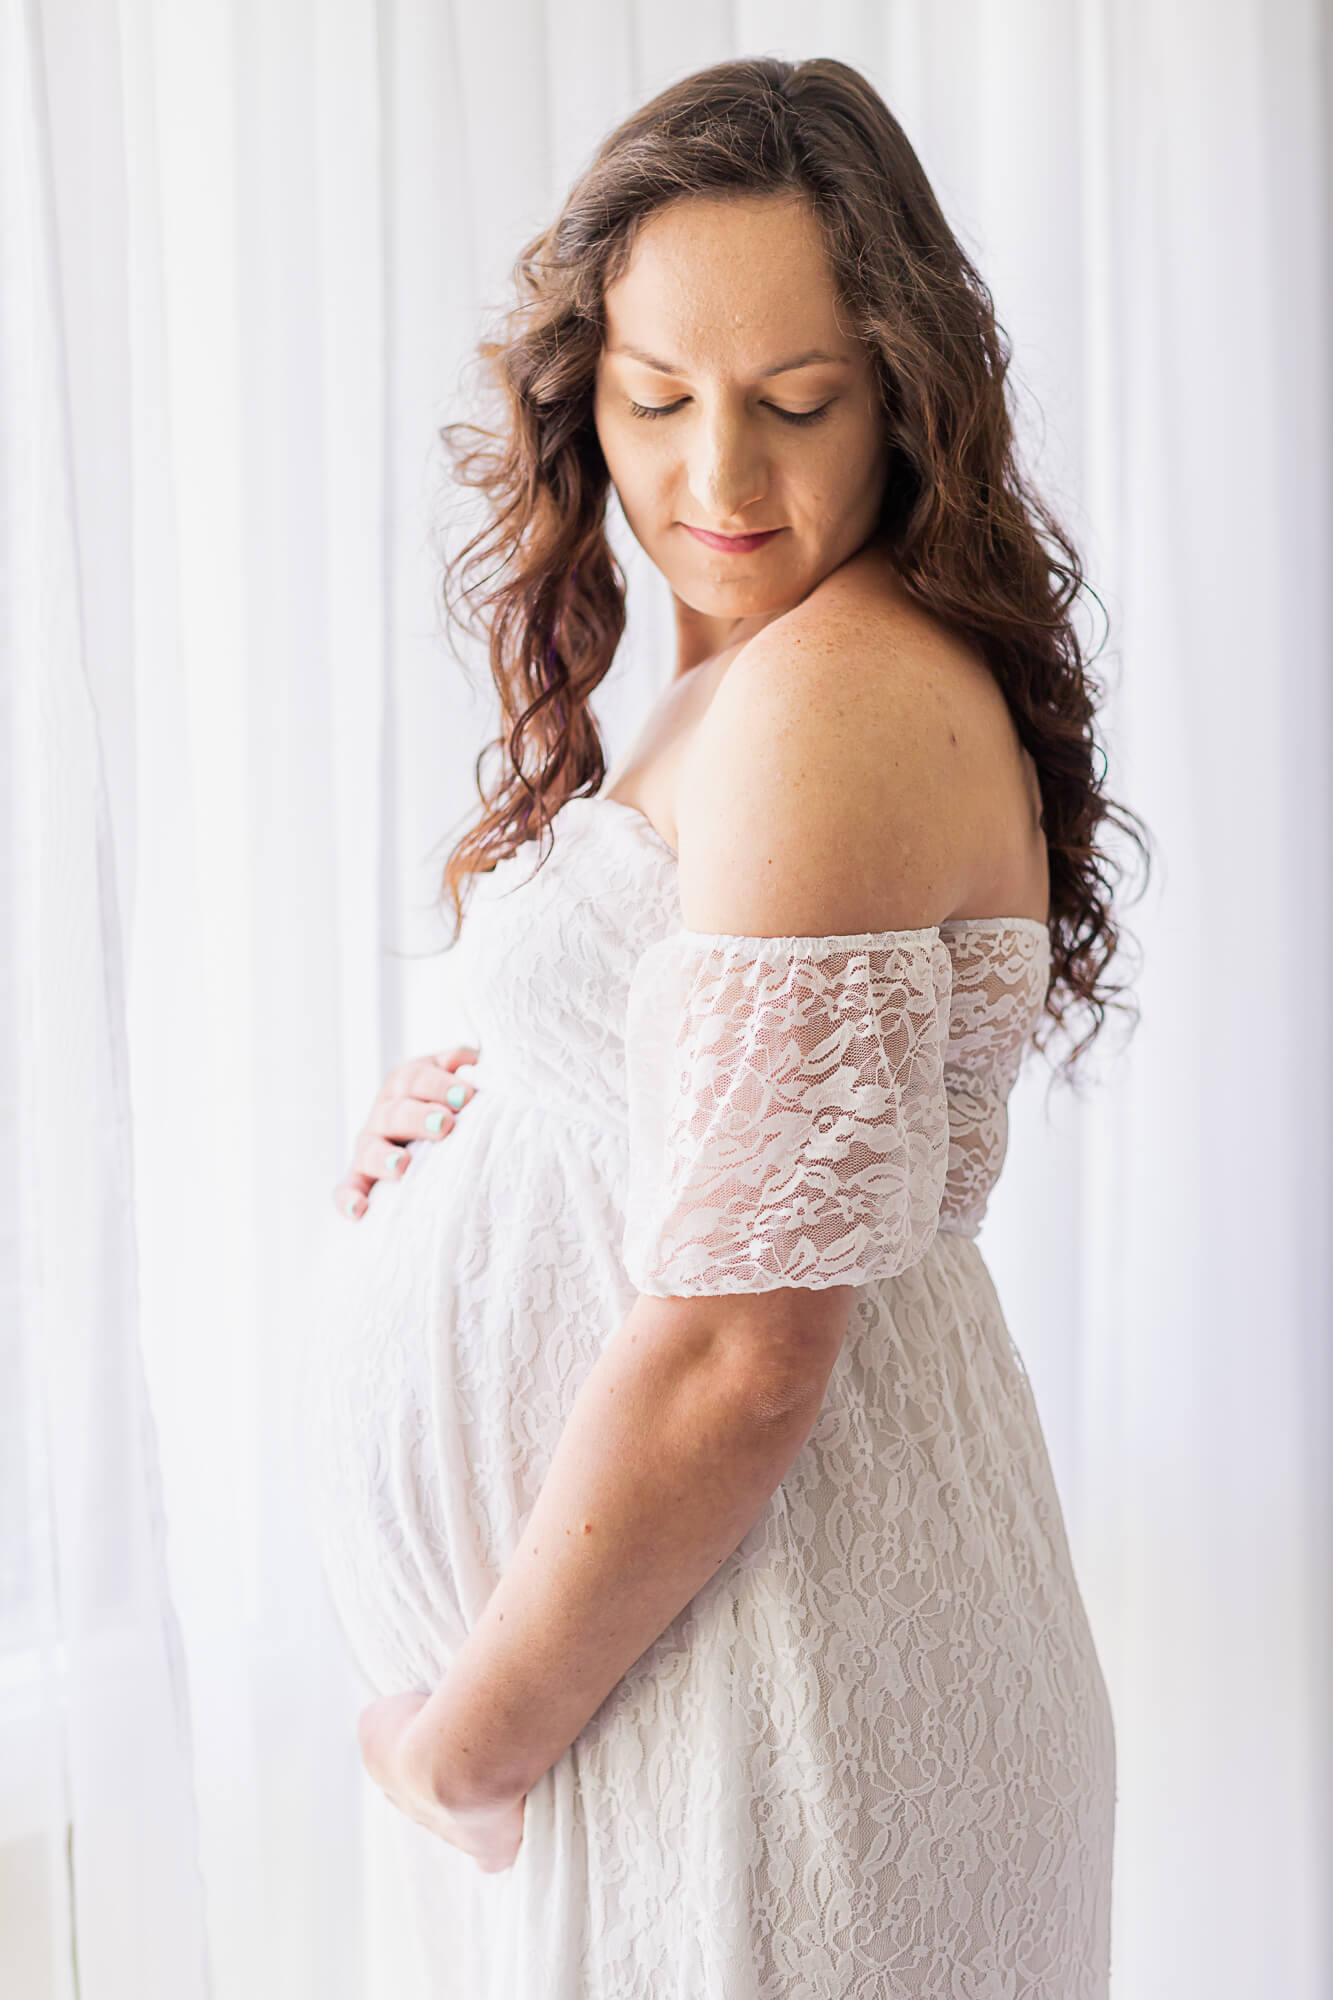 mom to be in white off the shoulder gown standing near a window 4D Ultrasound Birmingham AL